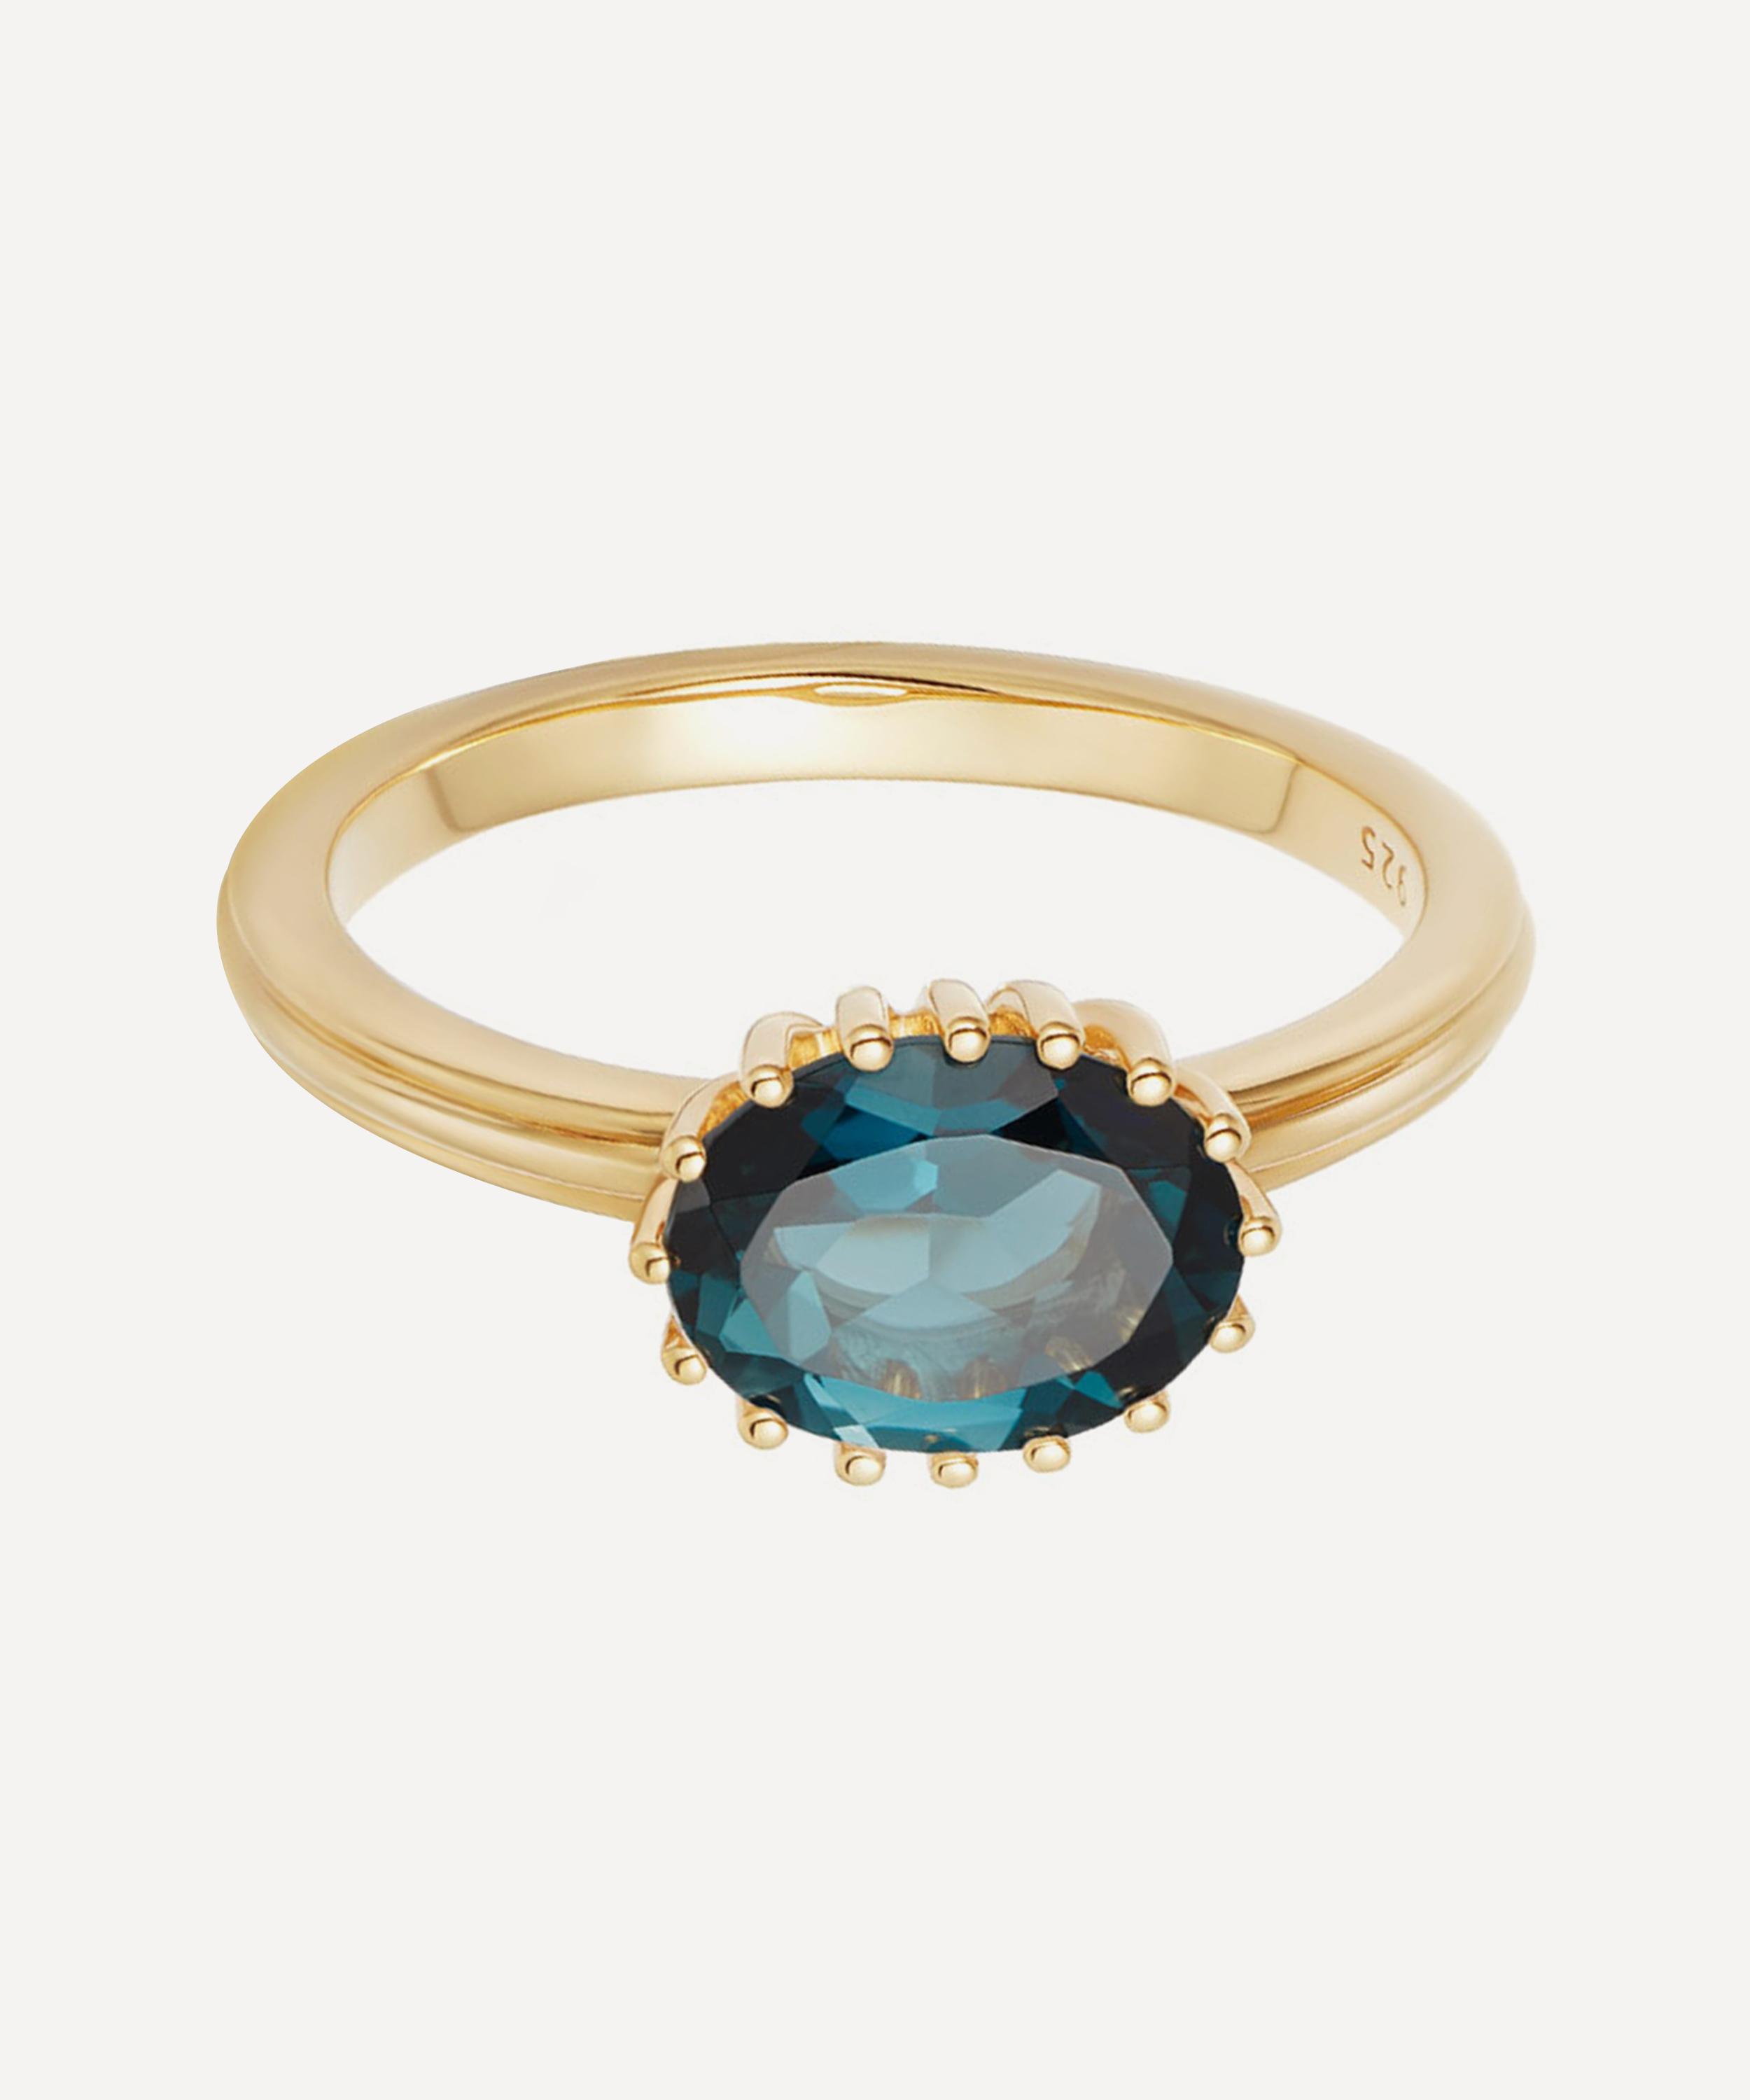 ASTLEY CLARKE GOLD PLATED VERMEIL SILVER LARGE LINIA LONDON BLUE TOPAZ RING,000638894